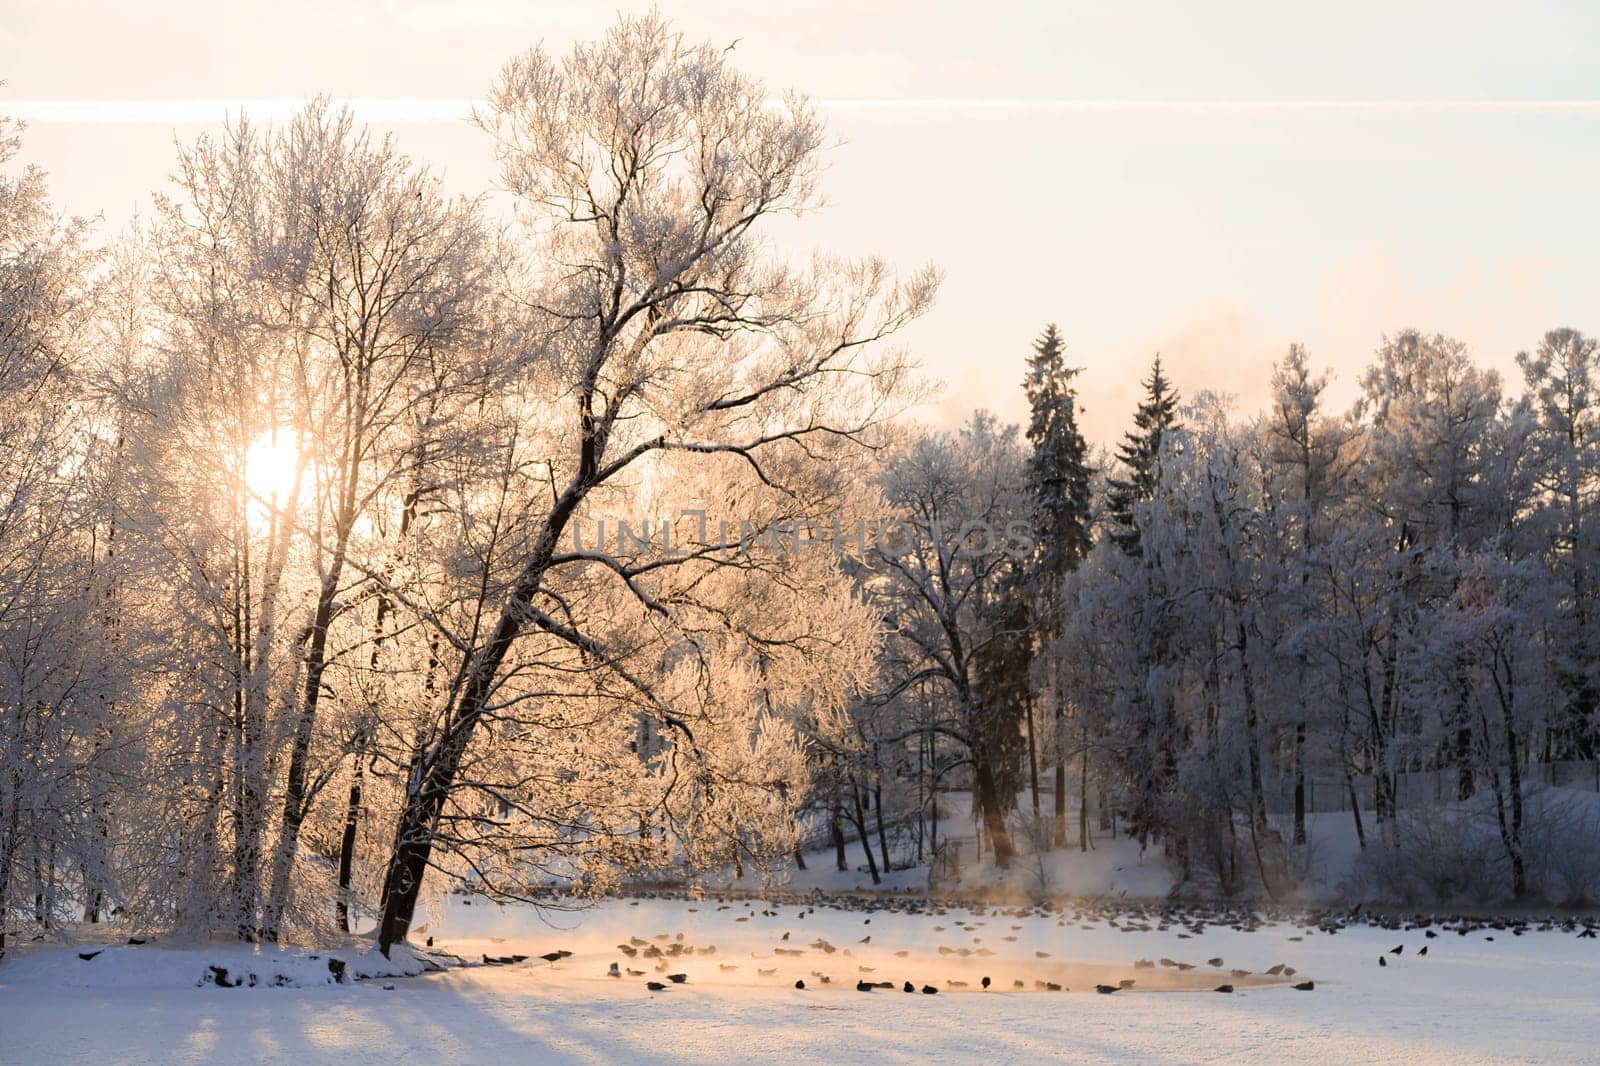 Winter snowy park landscape . the screensaver is winter . a snowy picture . cover photo by alenka2194